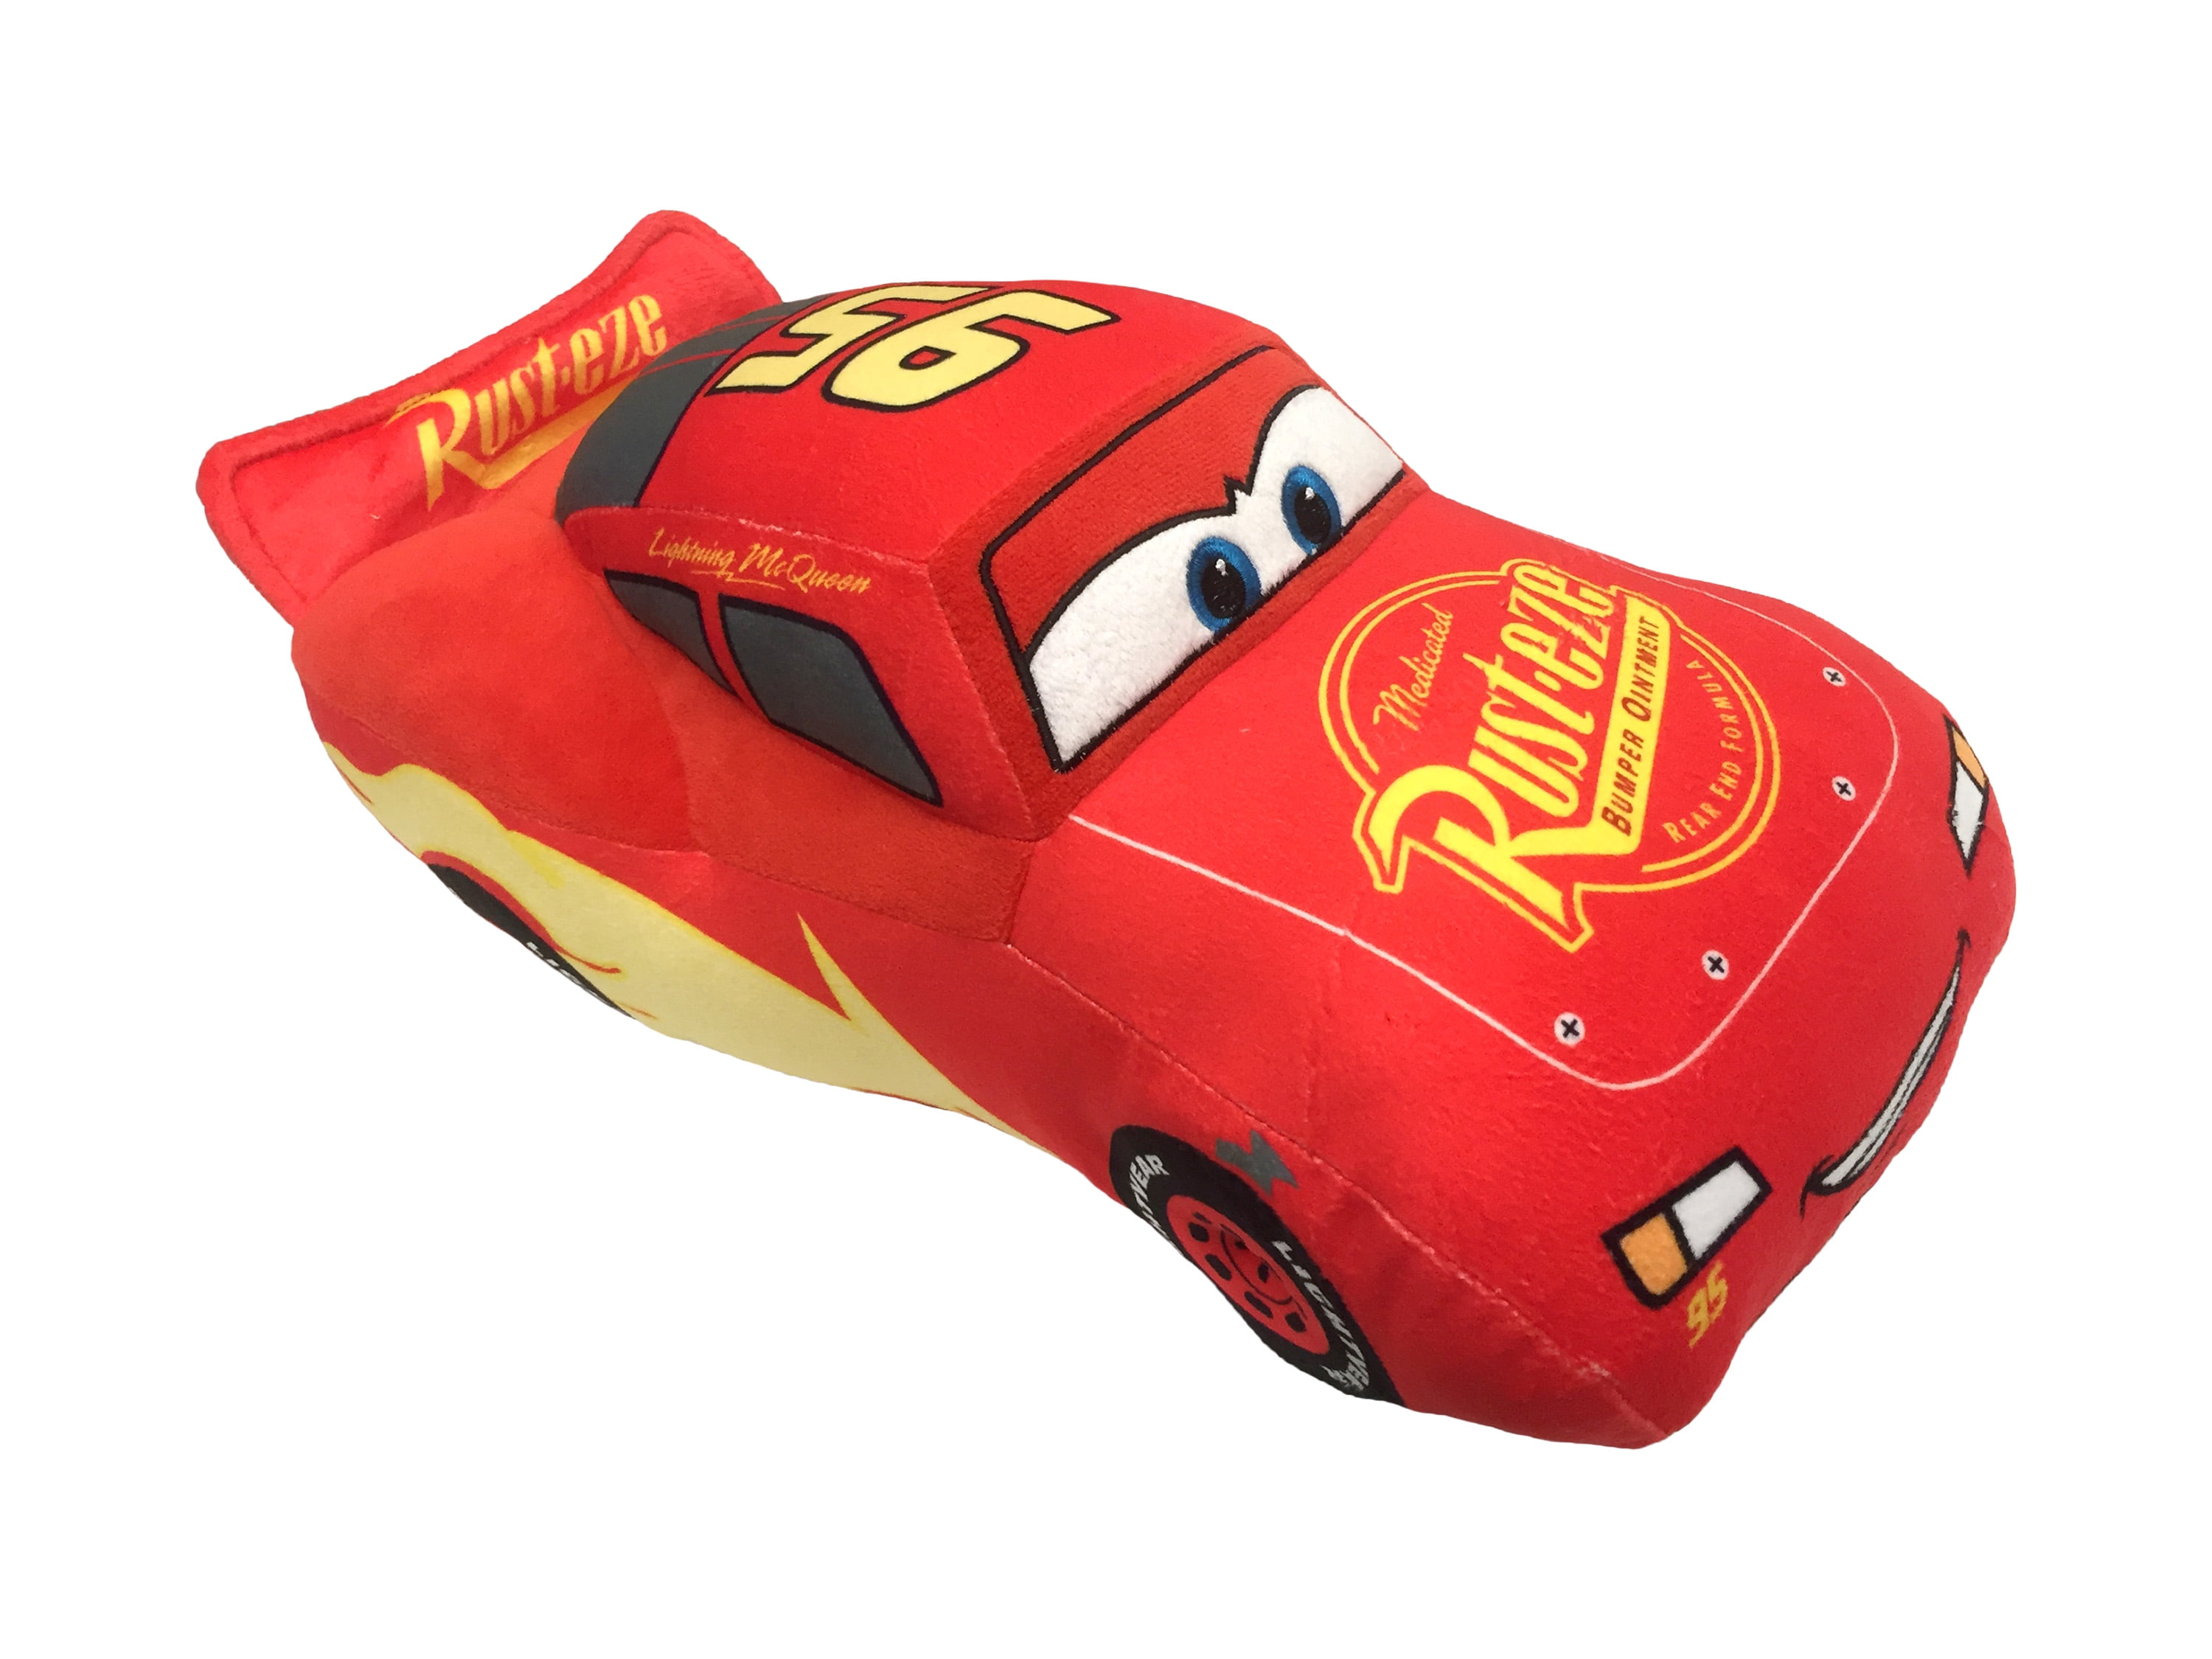 1 of 1 lightning mcqueen pants size 30, comment if you would like